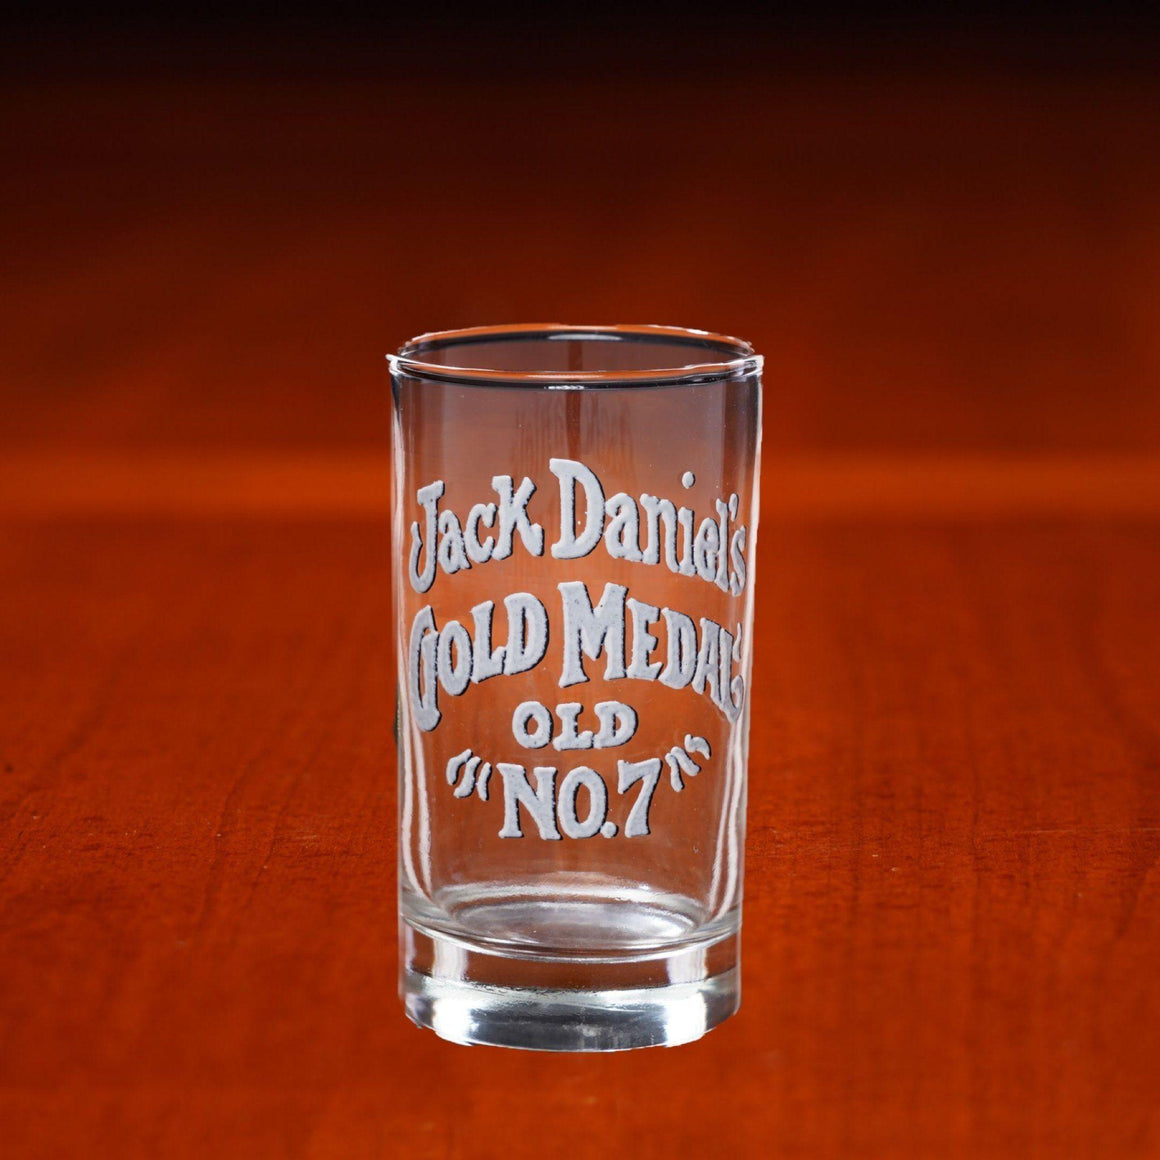 Jack Daniel’s 1971 Gold Medal Highball Glass - The Whiskey Cave